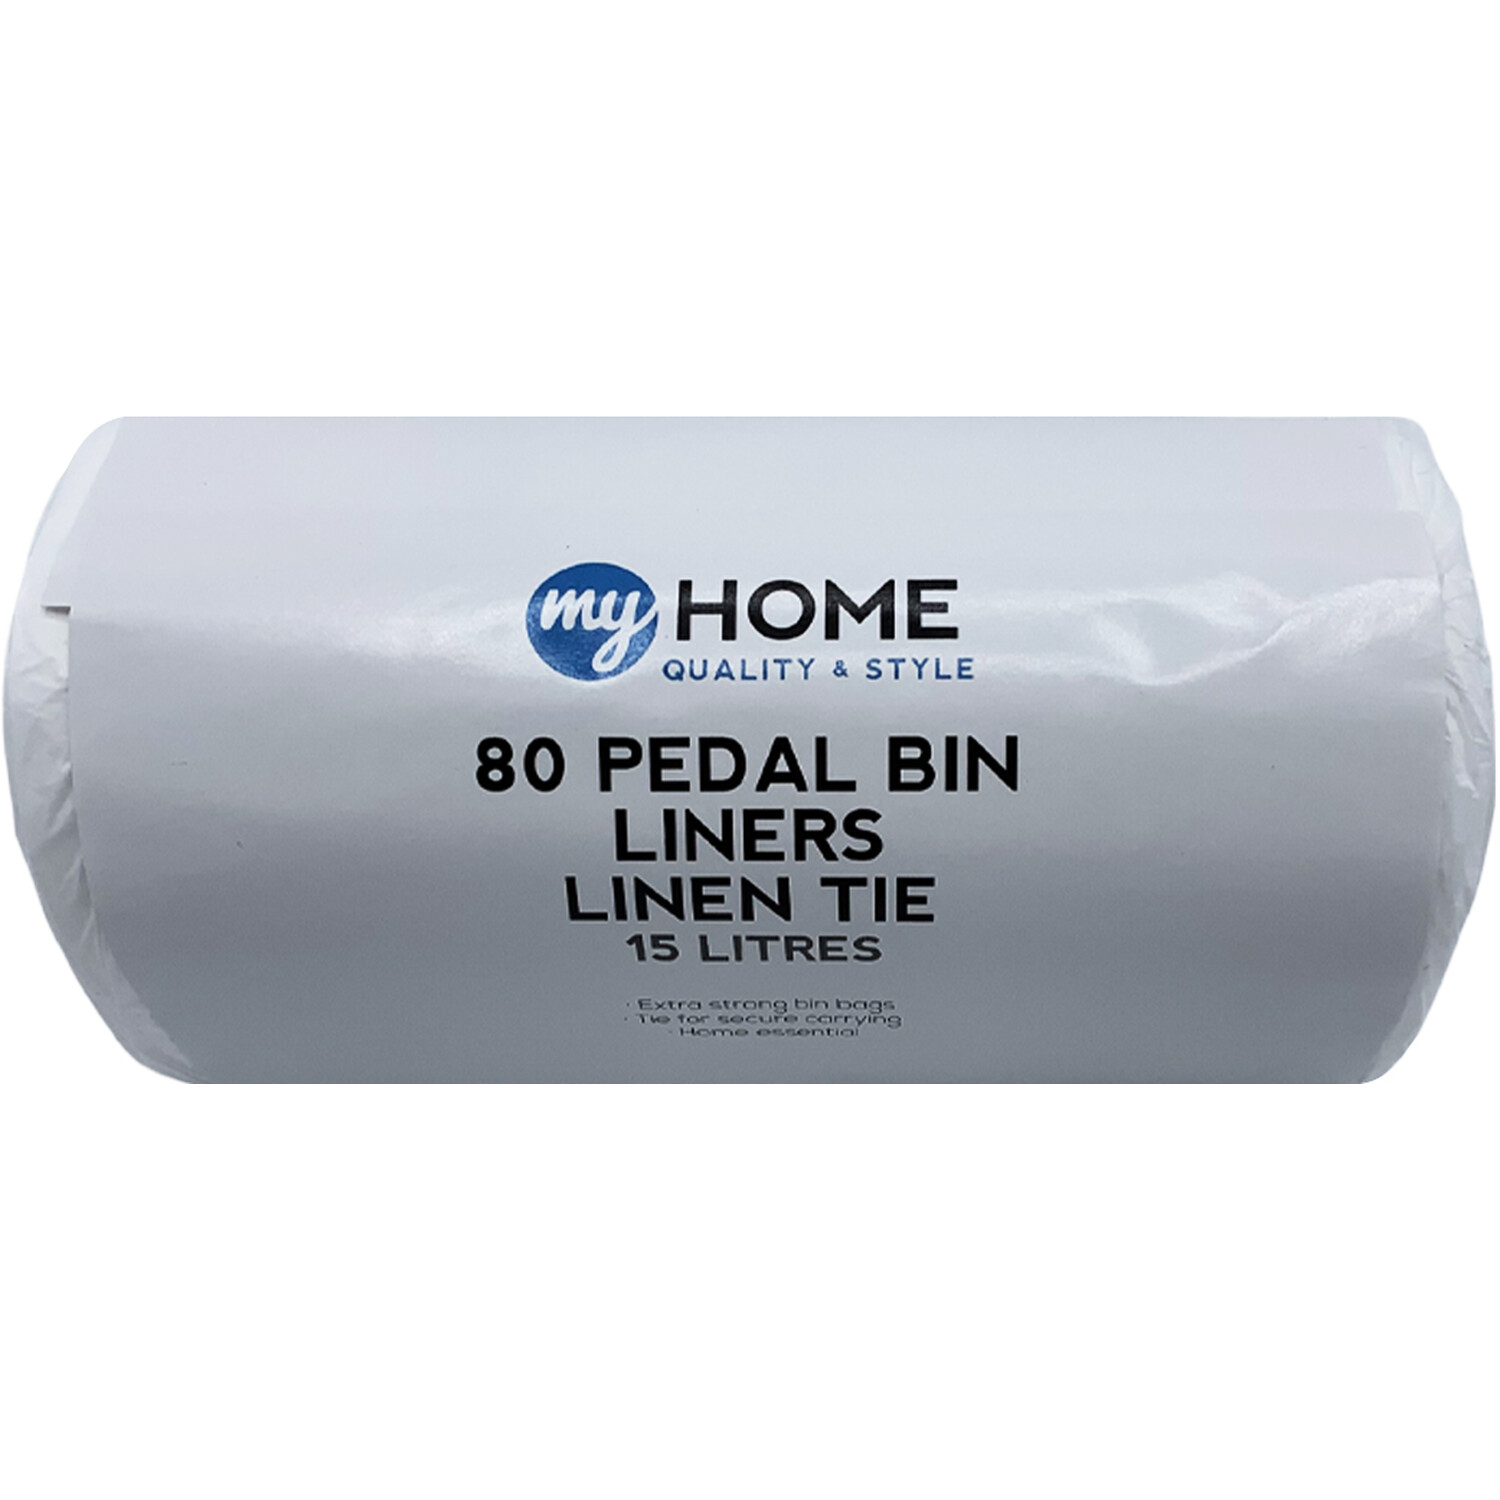 Pack of 80 Pedal Bin Liners Linen Tie 15L - White Image